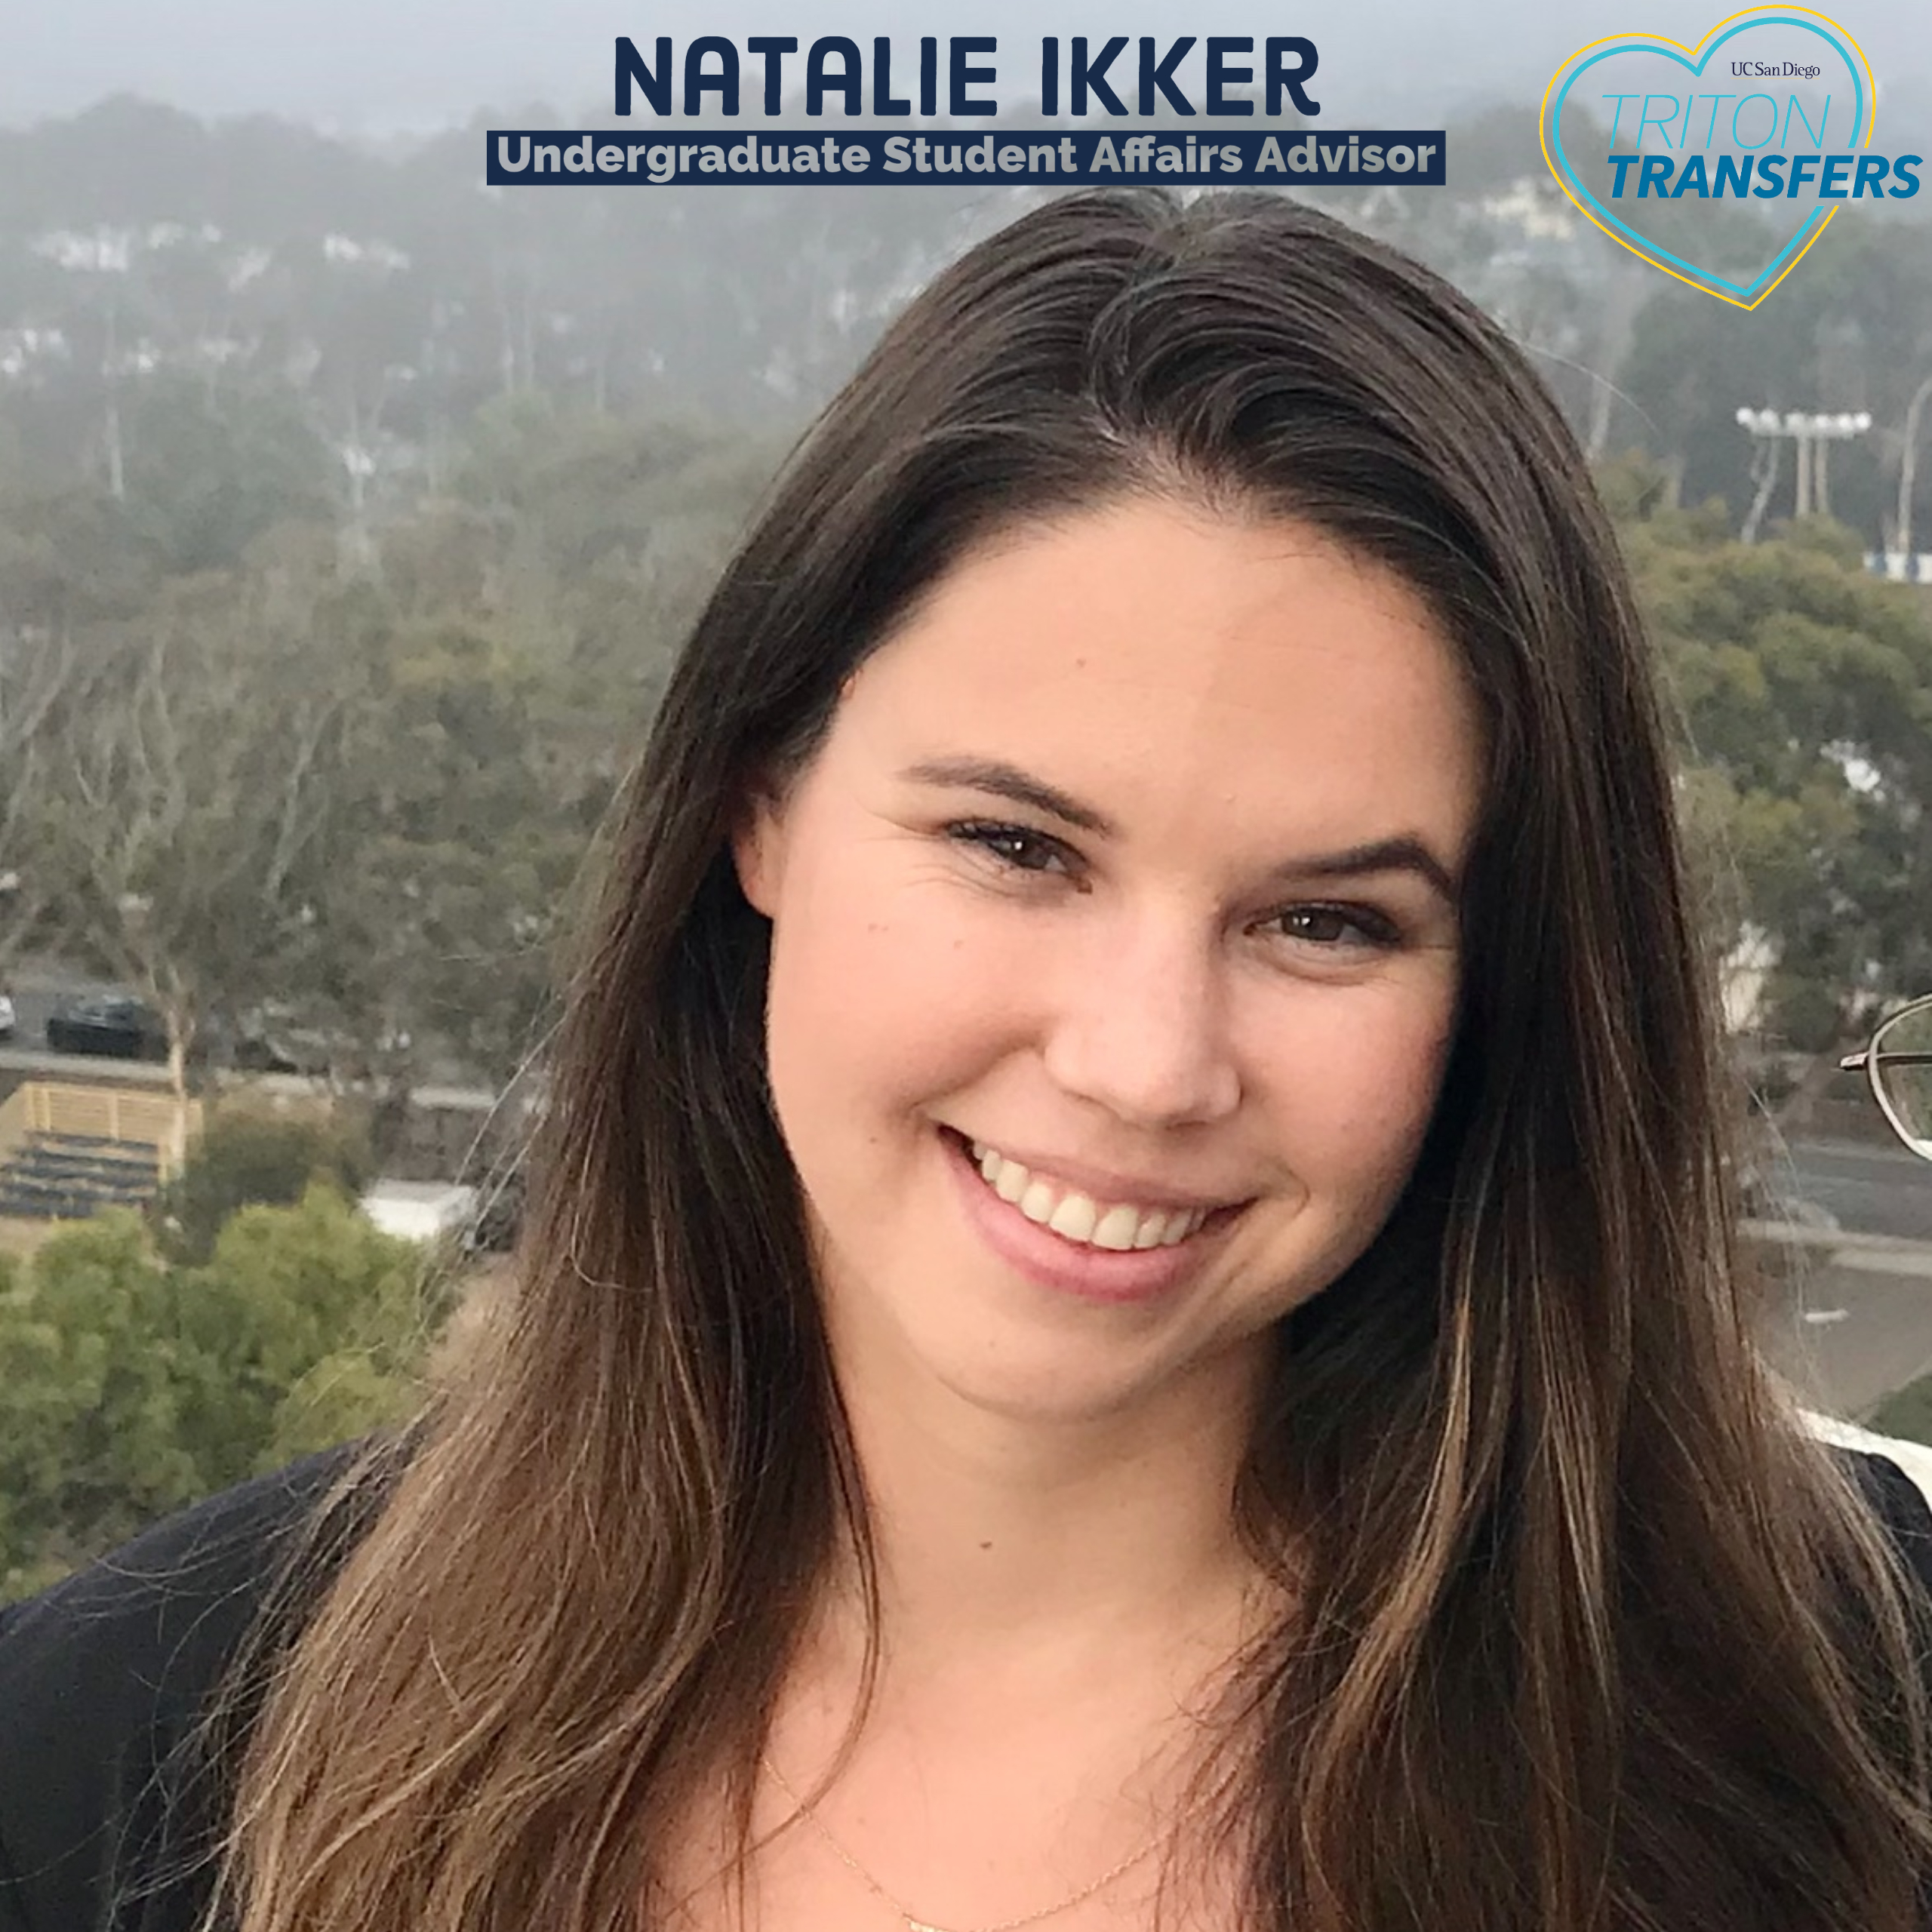 Natalie Ikker Preferred pronouns: she/her/hers Email: nbikker@ucsd.edu Undergraduate Student Affairs Advisor  Hometown: Oceanside, CA Transferred from: Palomar College Transferred to: UC Irvine Time to Transfer: 2 years  Hobbies: Ceramics, spending time with friends and loved ones, exploring new places, and enjoying beautiful San Diego  Advice for Transfer Students: “Take time to explore your goals, academic strengths, passions, career interests, and the involvement opportunities you would like to take part in during your time at UICSD. Time goes by quickly, so don’t be afraid to ask questions and challenge yourself to make the most out of your time here!”